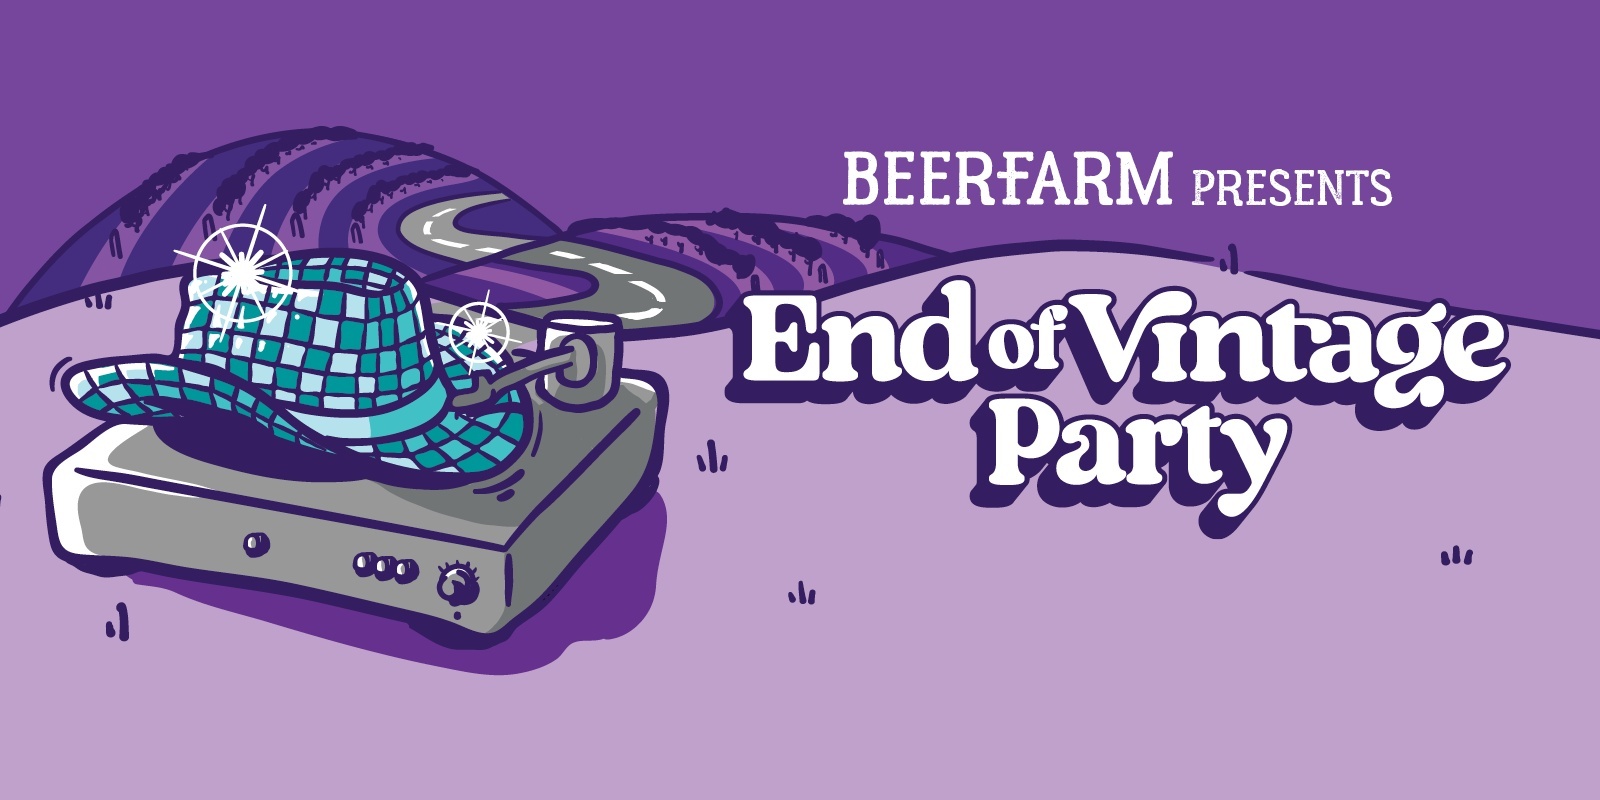 Banner image for Beerfarm End of Vintage Party